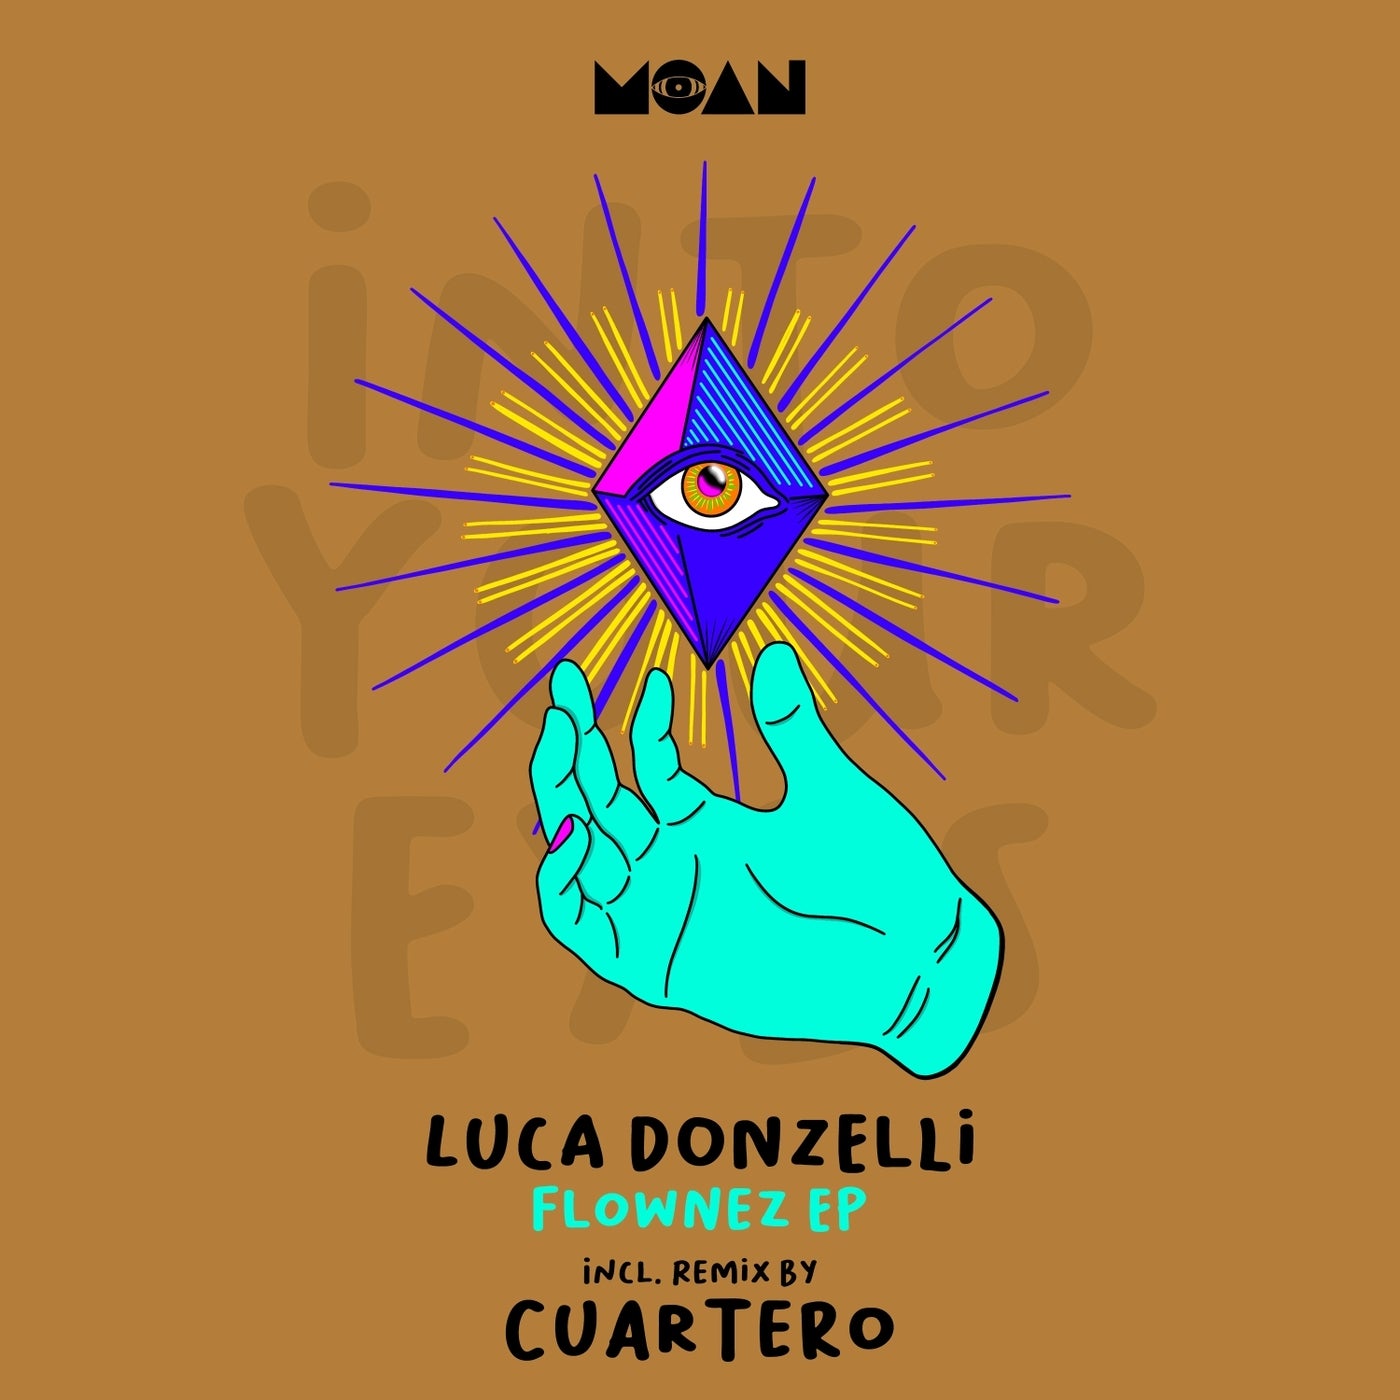 image cover: Luca Donzelli - Flownez EP on Moan